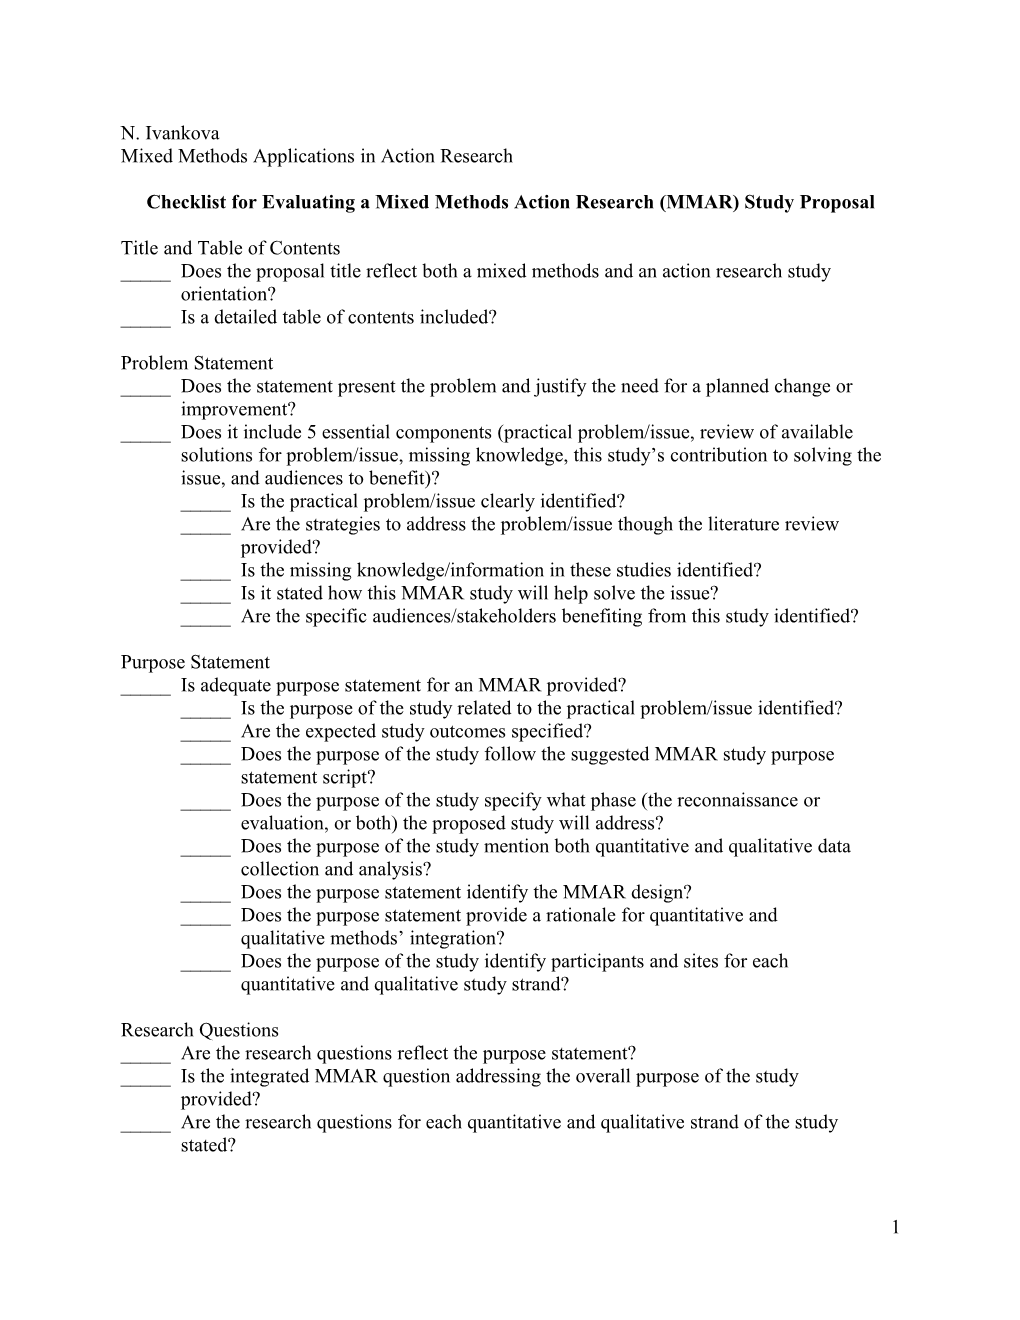 Epr 792 Checklist for Evaluating Mixed Methods Research Study